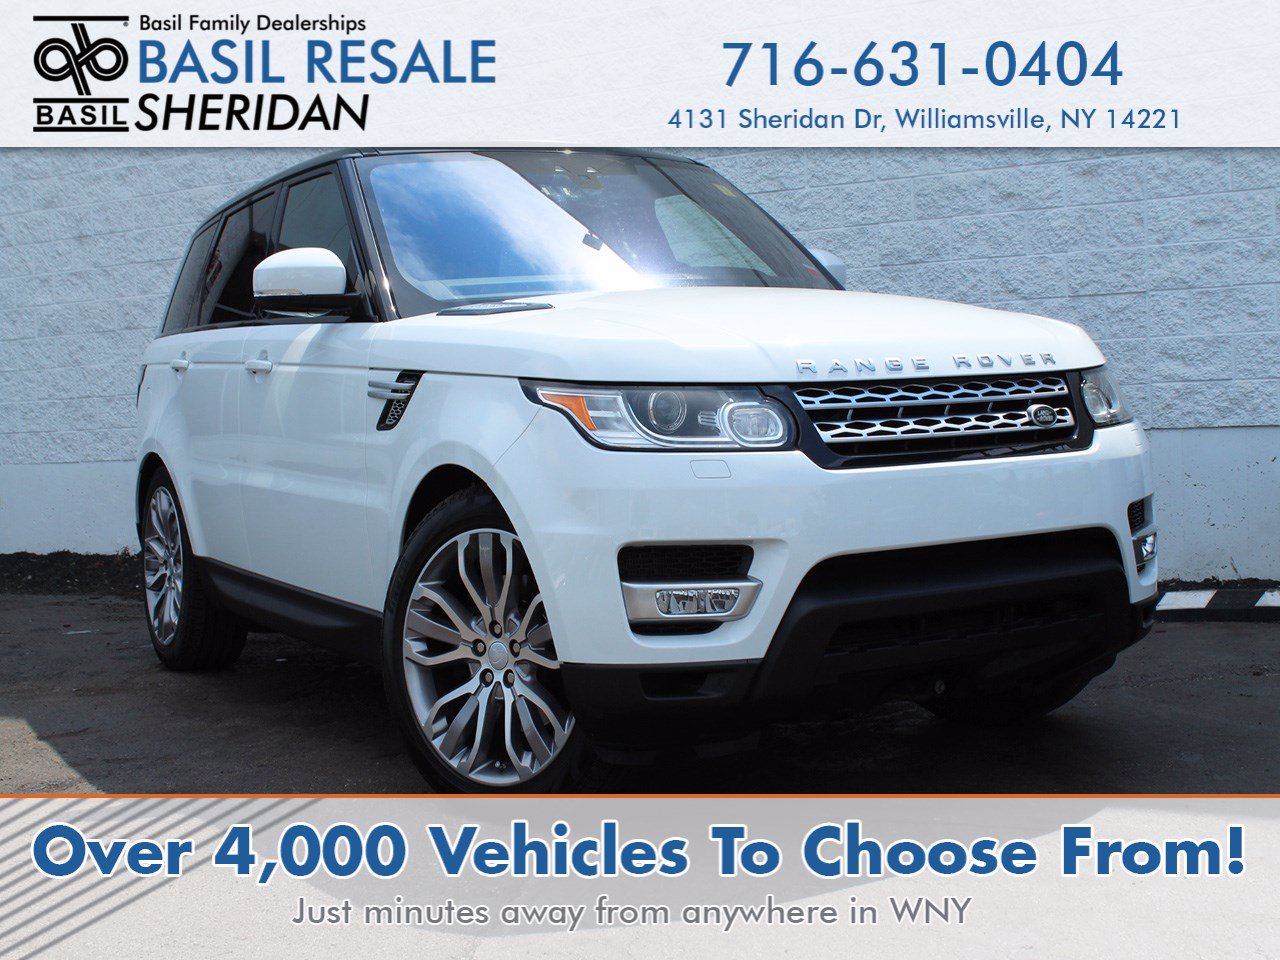 Range Rover Dealer Buffalo Ny  : Distinctive And Individual, A True Range Rover In Compact Form.